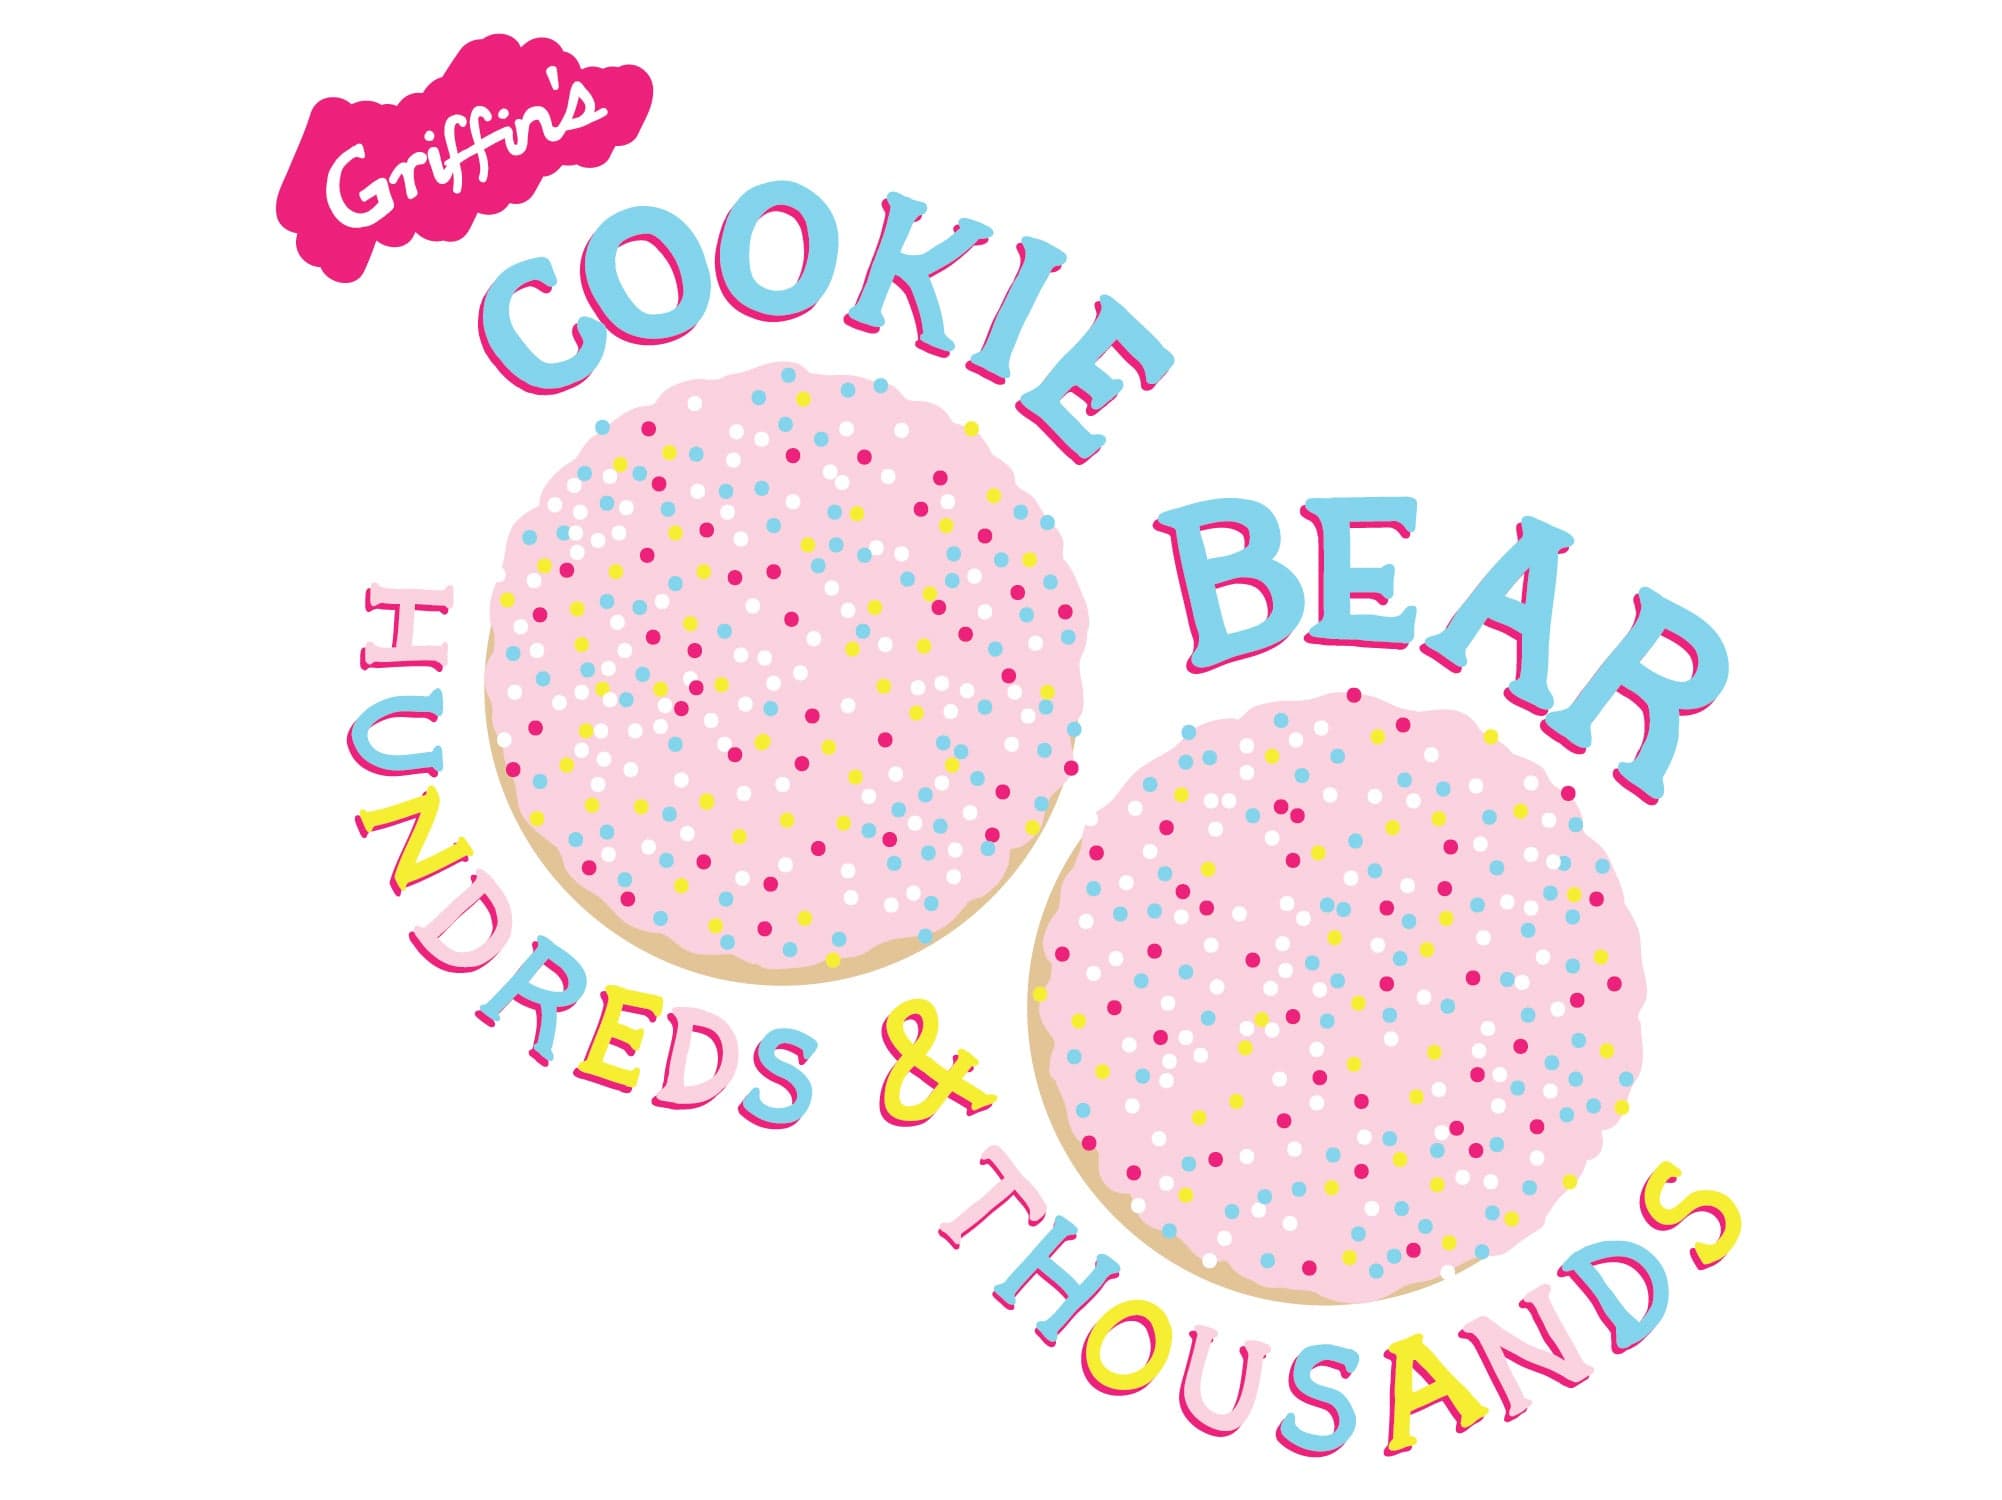 Griffin’s Cookie Bear Hundreds and Thousands